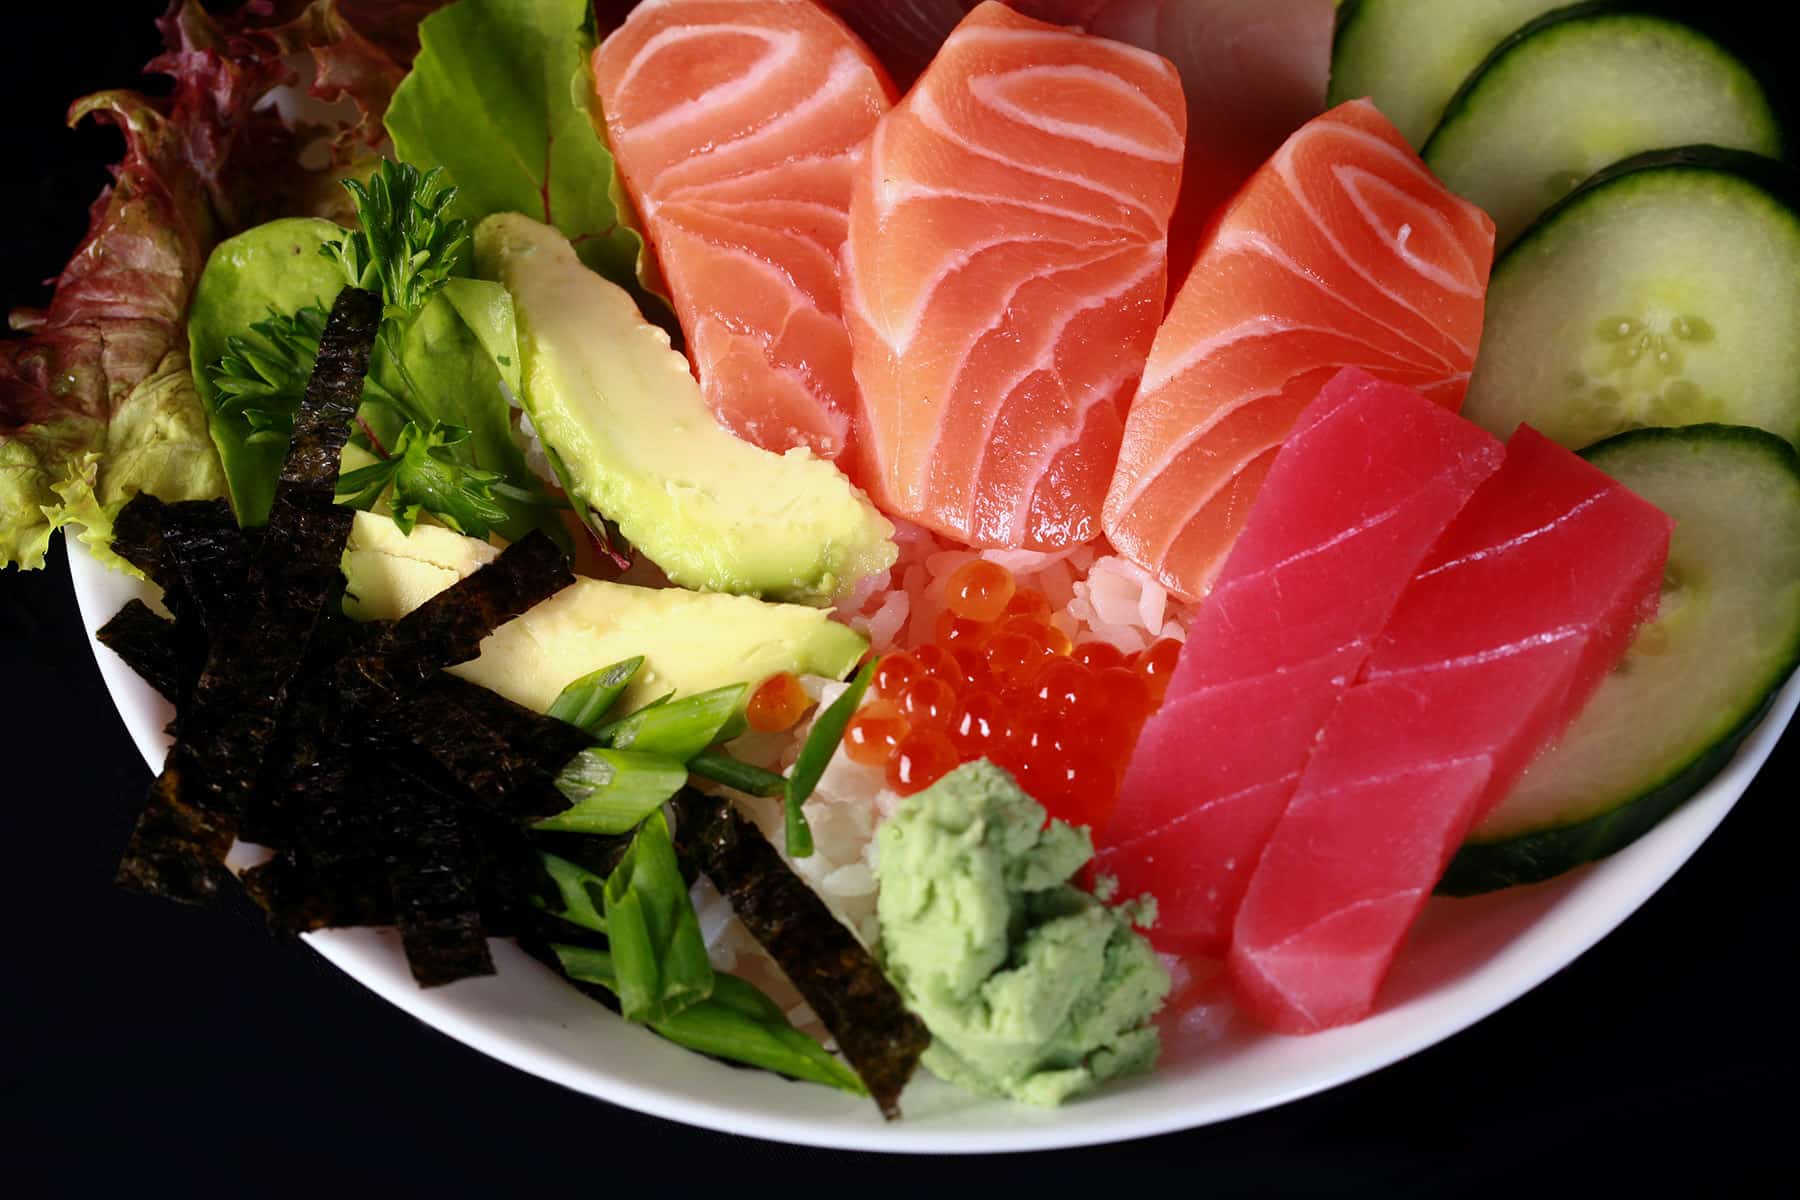 A close up view of chirashi - raw fish slices and vegetables arranged on a bowl of rice.